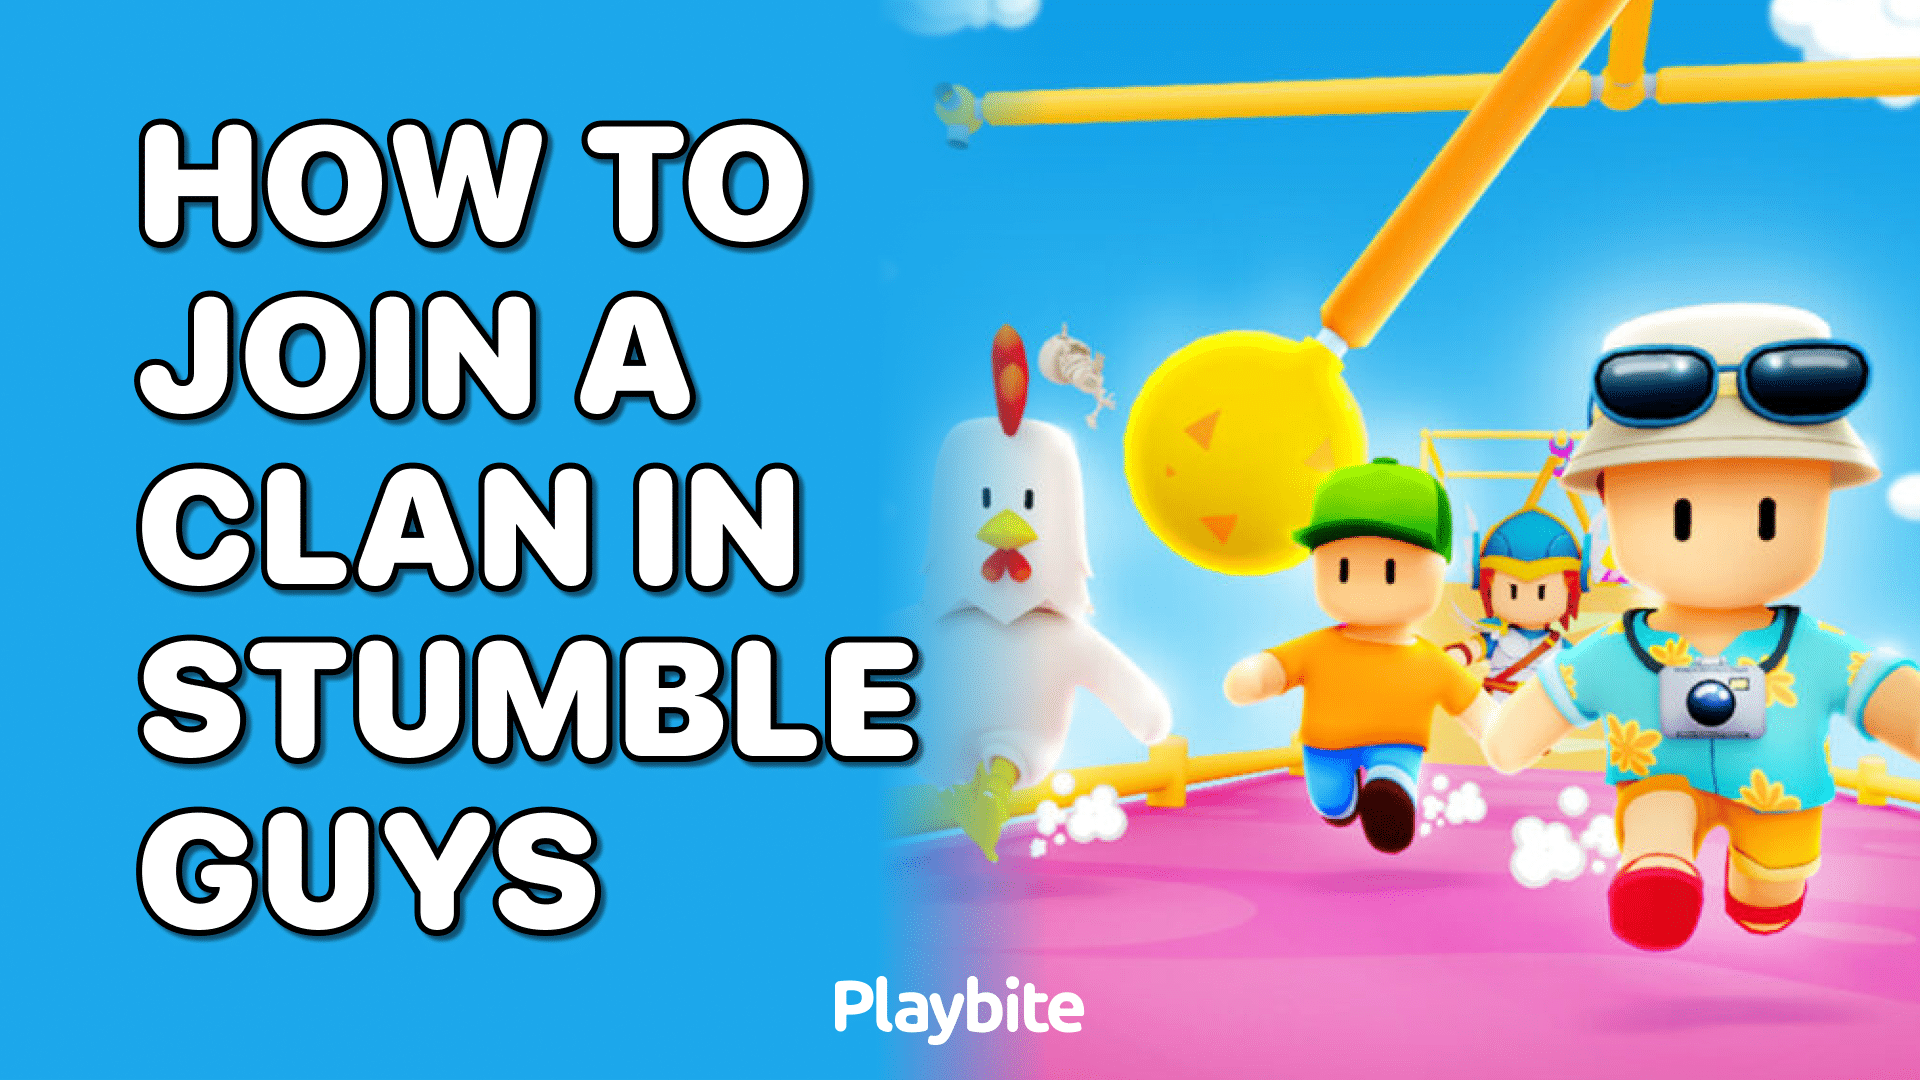 How To Join A Clan In Stumble Guys